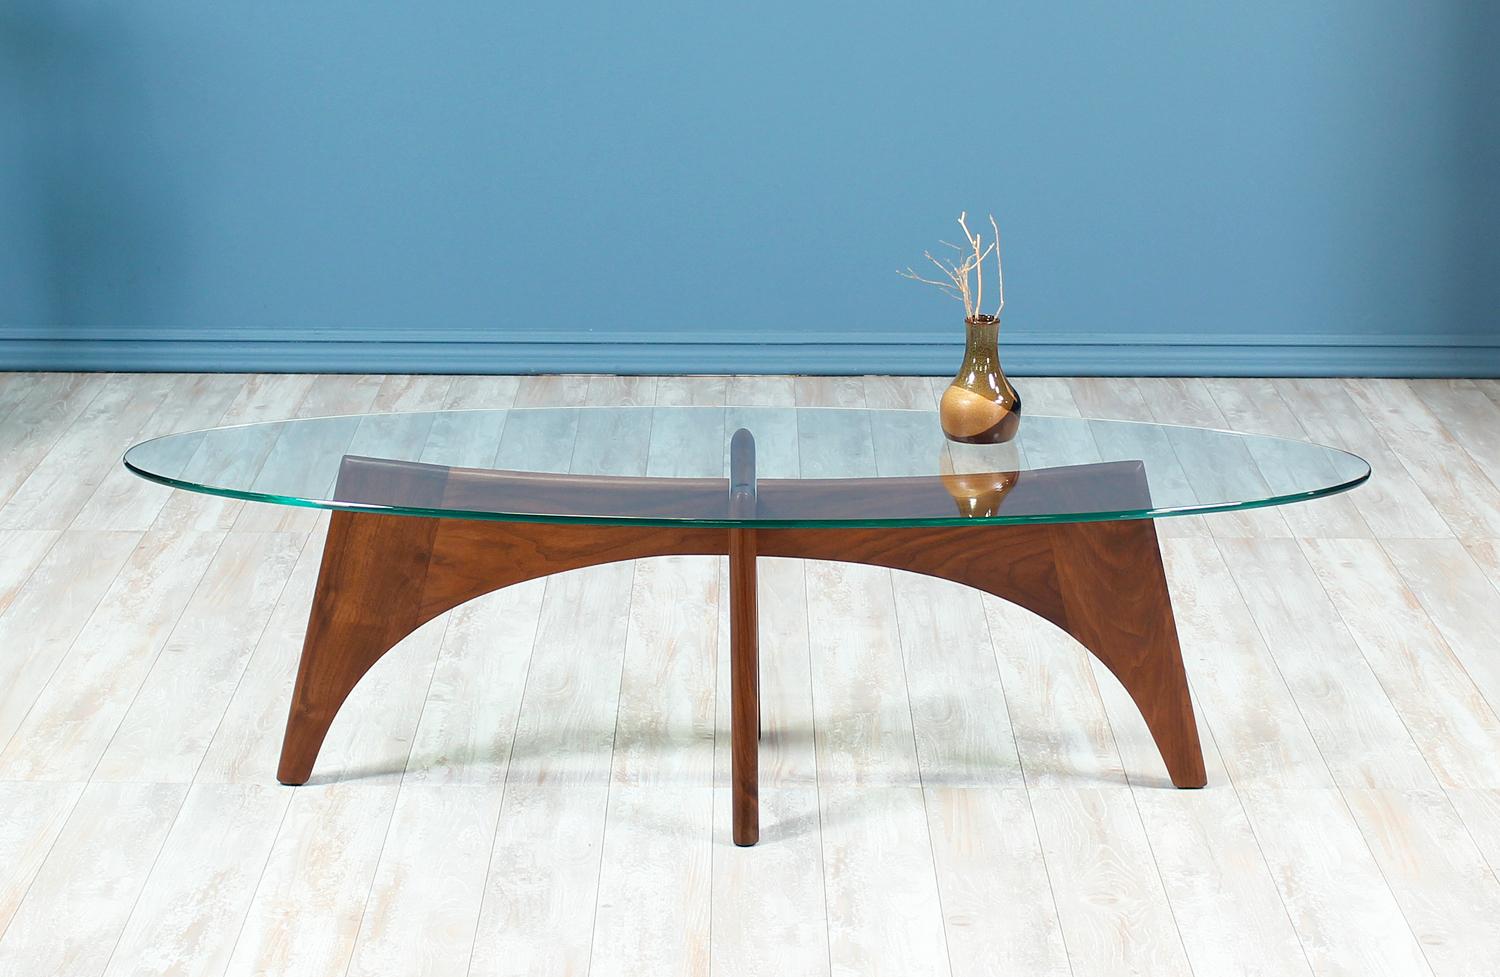 Designer: Adrian Pearsall
Manufacturer: Craft Associates
Country of origin: United States
Date of manufacture: 1960-1969
Materials: Walnut wood, new glass top
Period style: Mid-Century Modern

Condition: Excellent
Extra conditions: Newly